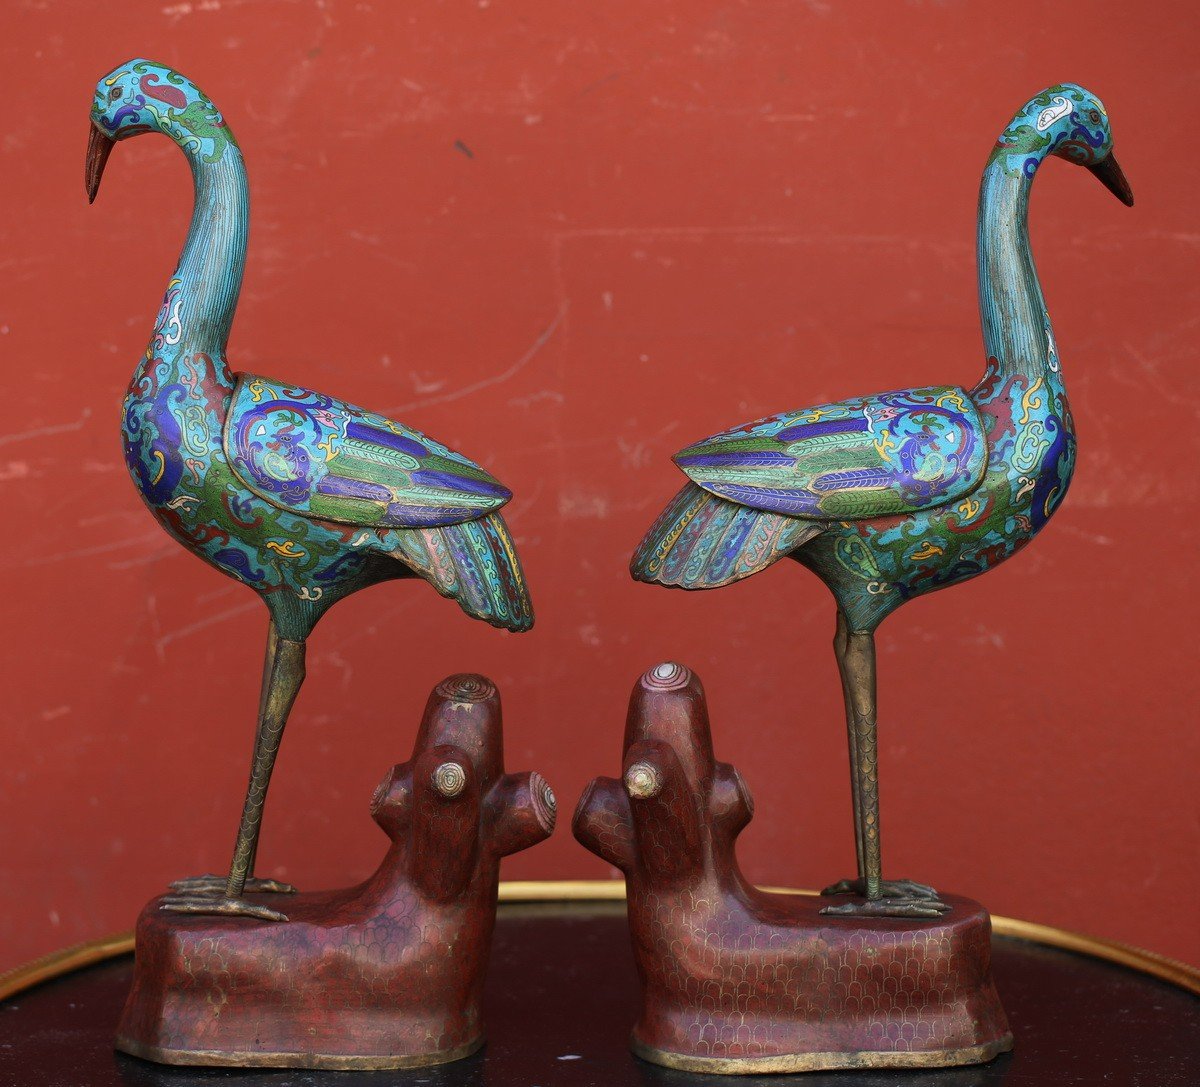 Pair Of Cloisonne Enamel Cranes On A Turquoise Background, China Late 19th Century-photo-2